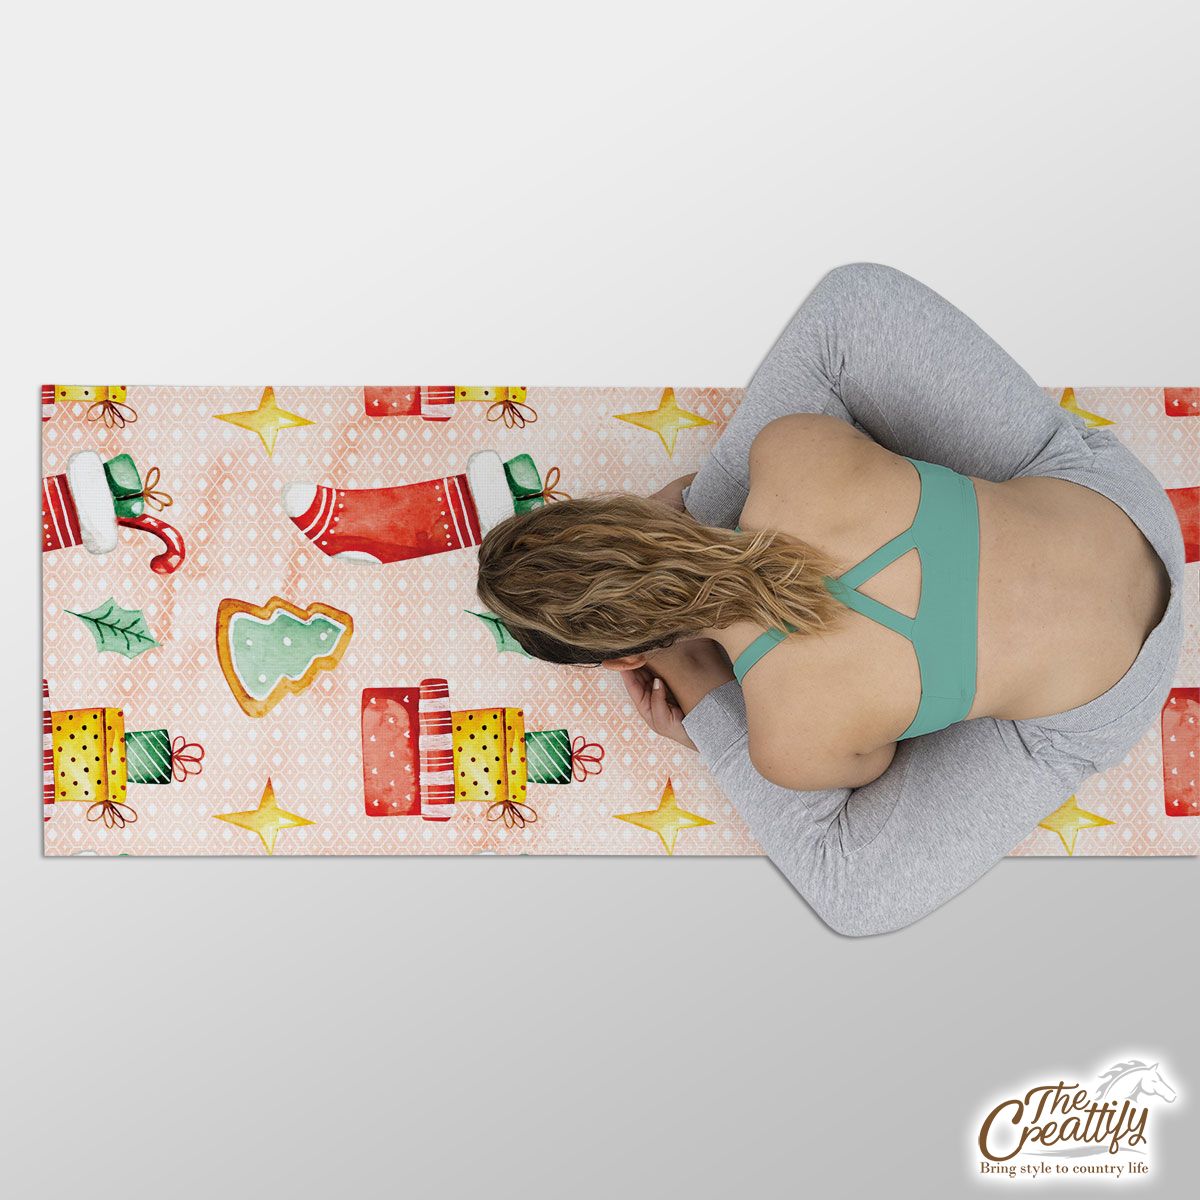 Gingerbread, Christmas Tree, Red Socks With Candy Canes Yoga Mat